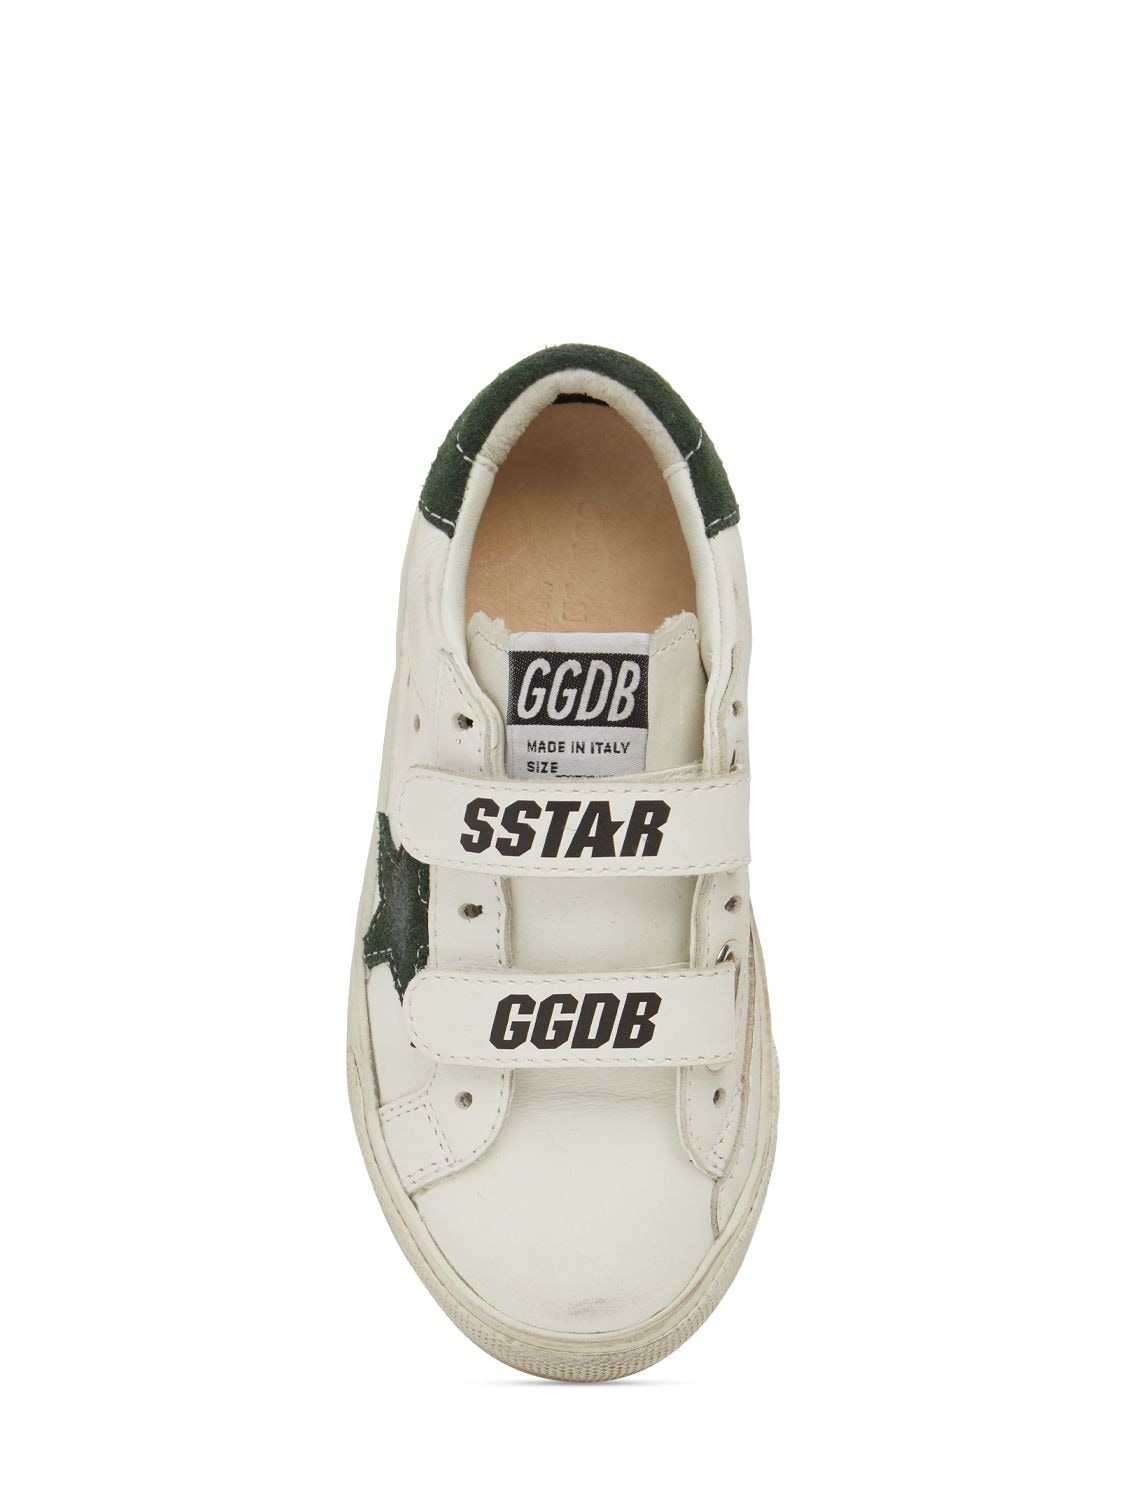 Shop Golden Goose Old School Leather Strap Sneakers In White,green